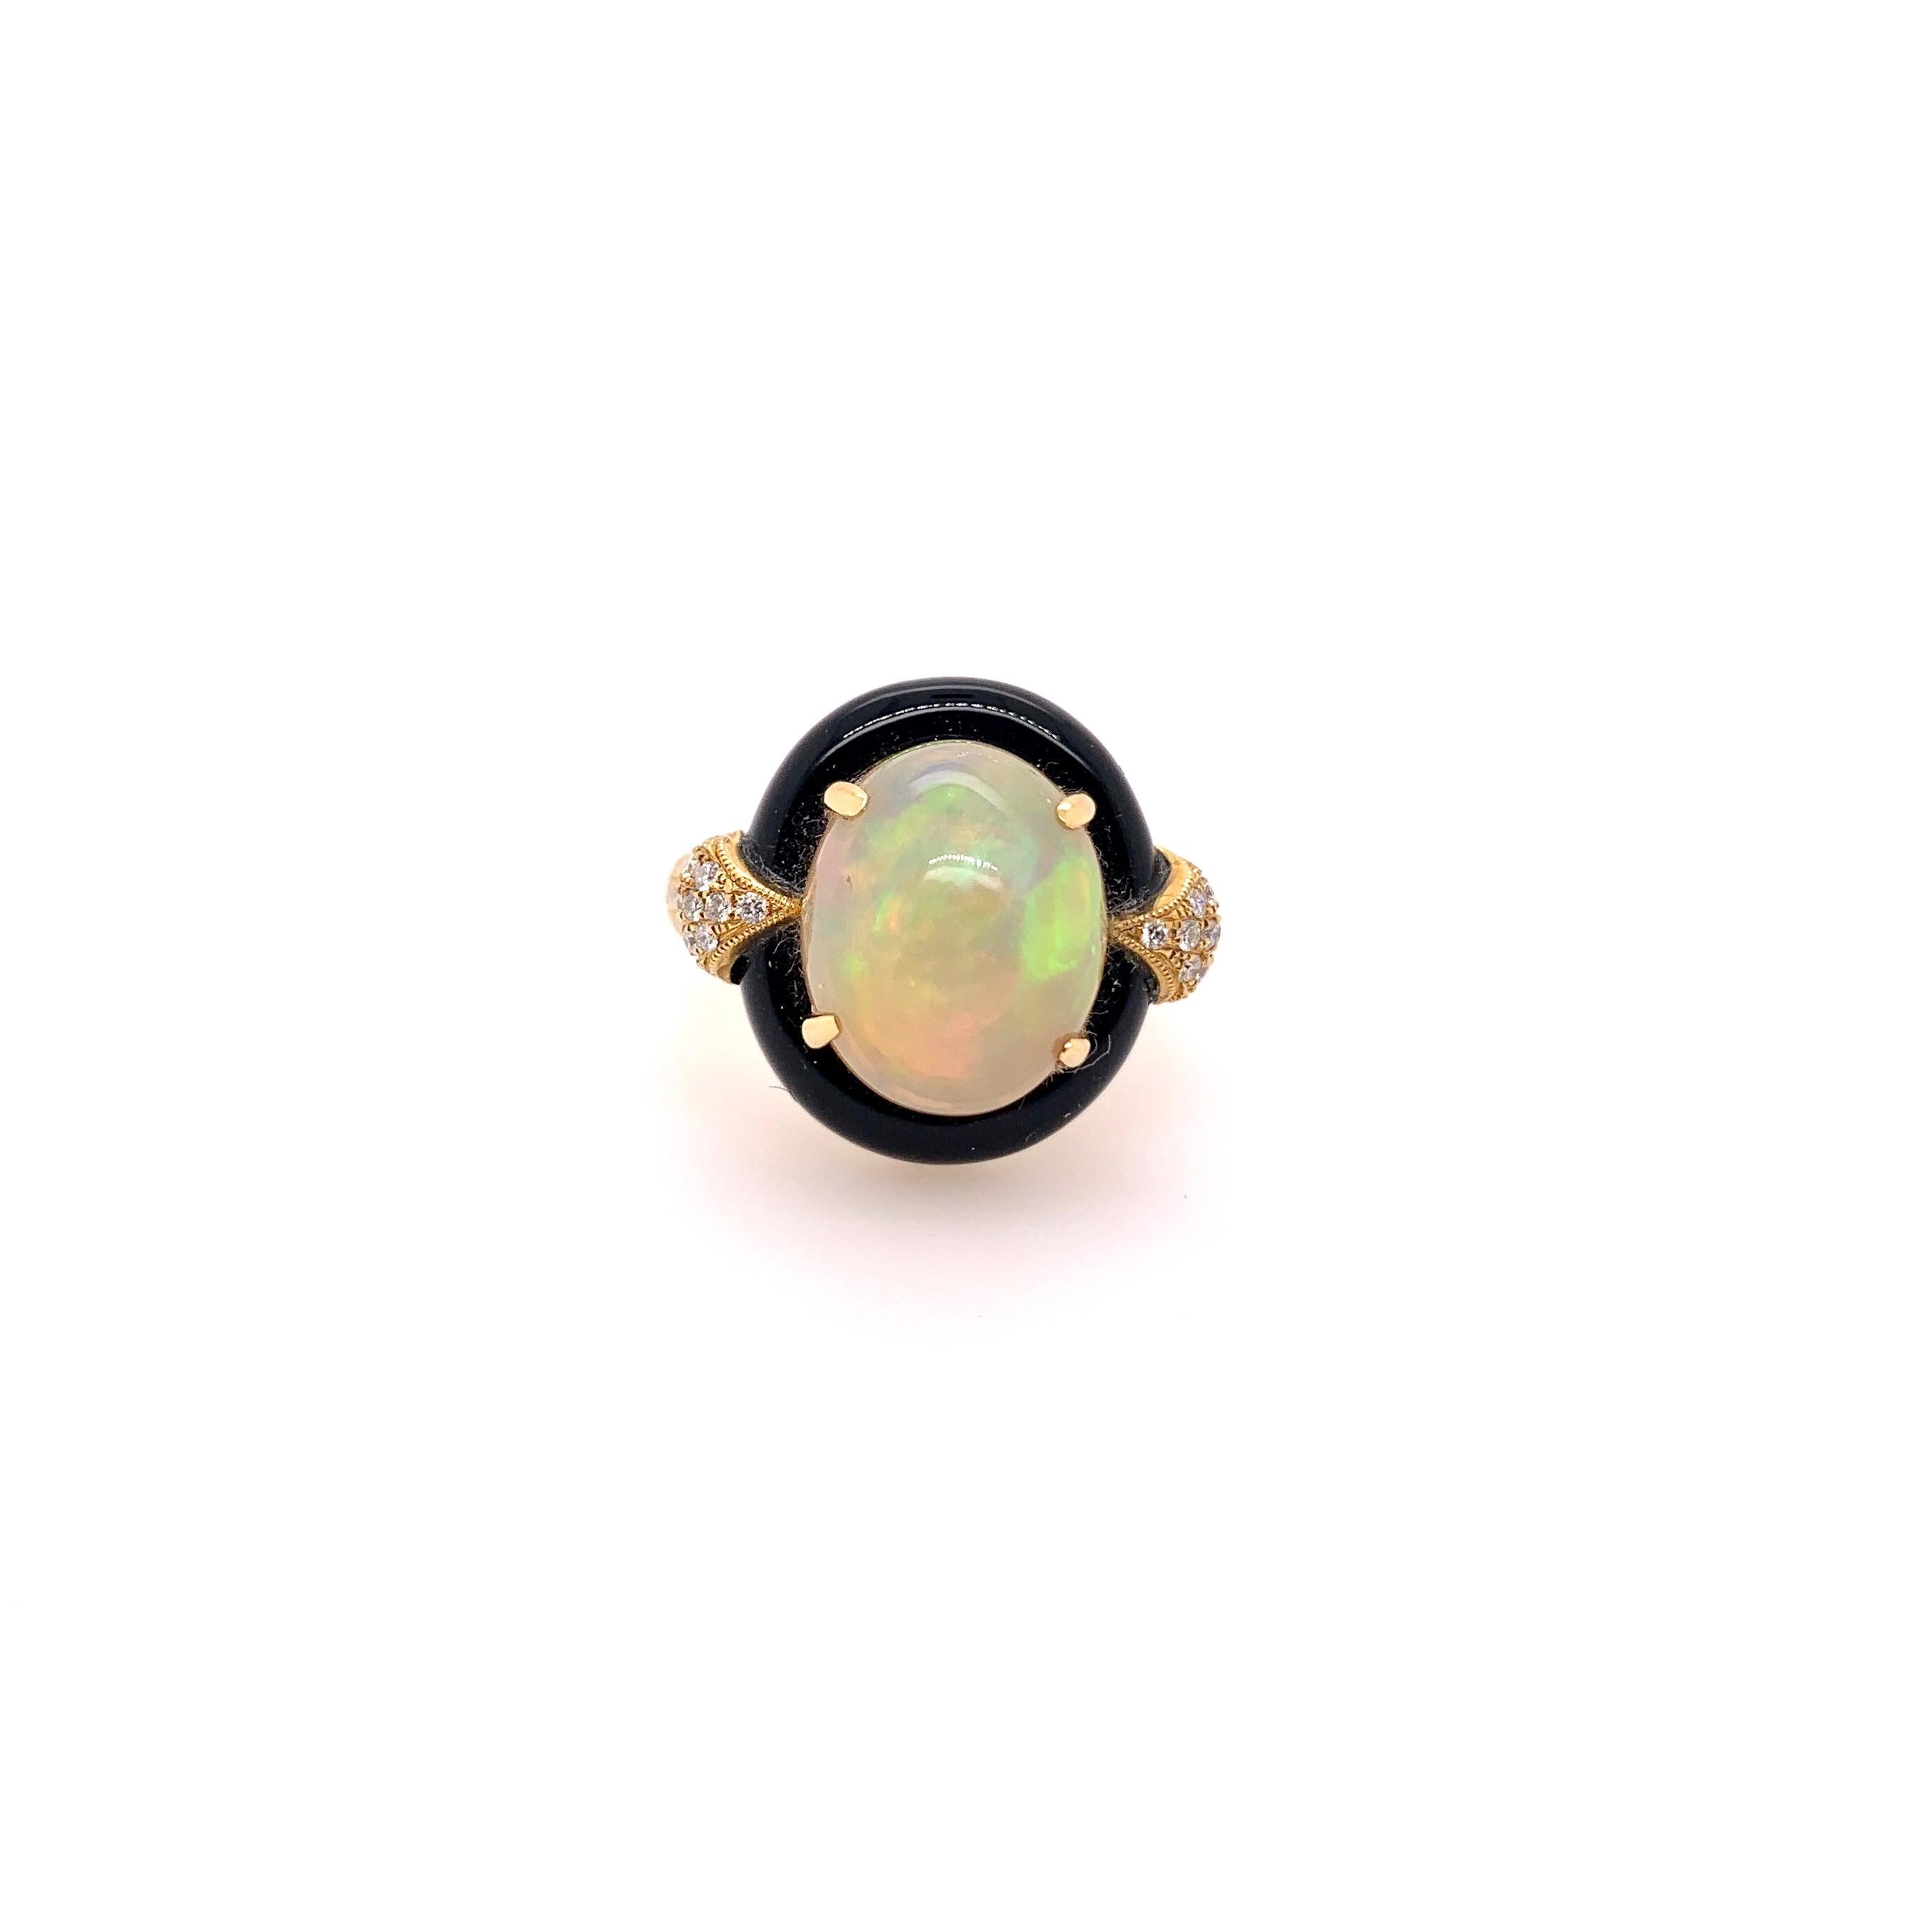 This stunning Ethiopian Opal is set in a custom made setting with special cut onyx to encompass the fiery stone.  The 18k yellow gold setting is further accentuated by the elaborate round brilliant diamonds set in and around the entire top half of